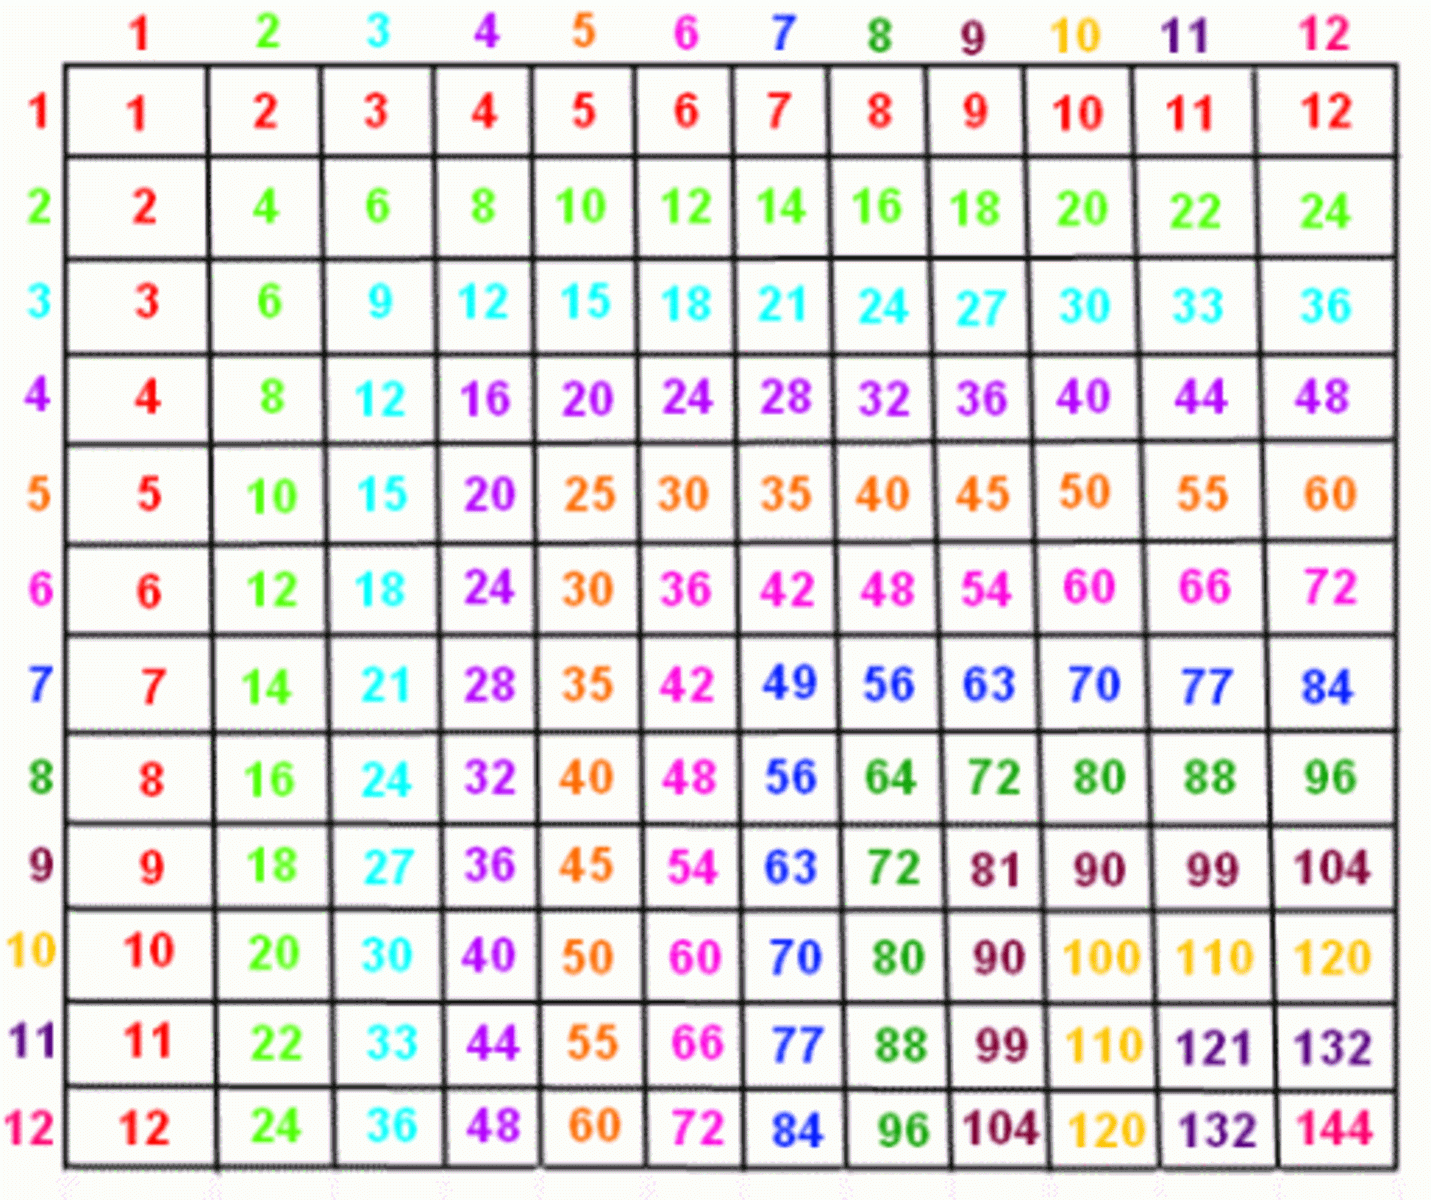 times table chart up to 100